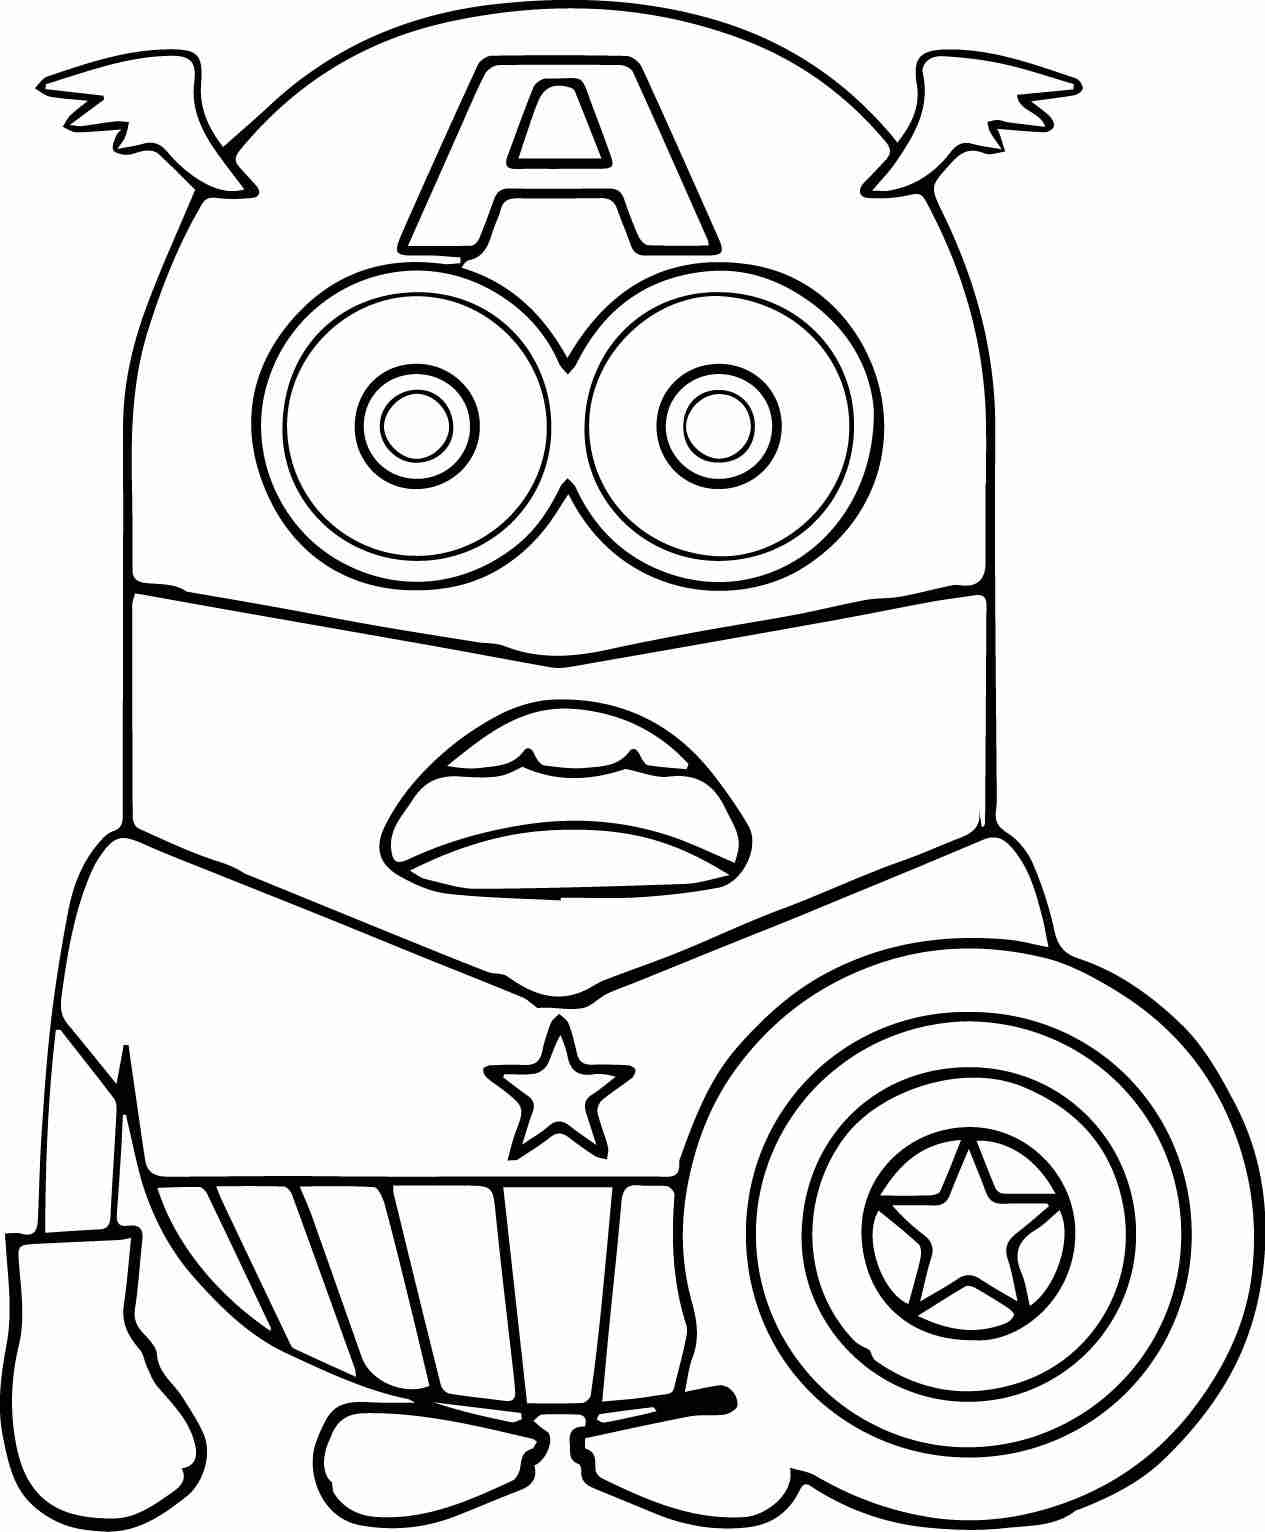 Minions Coloring Pages Pdf at Free printable